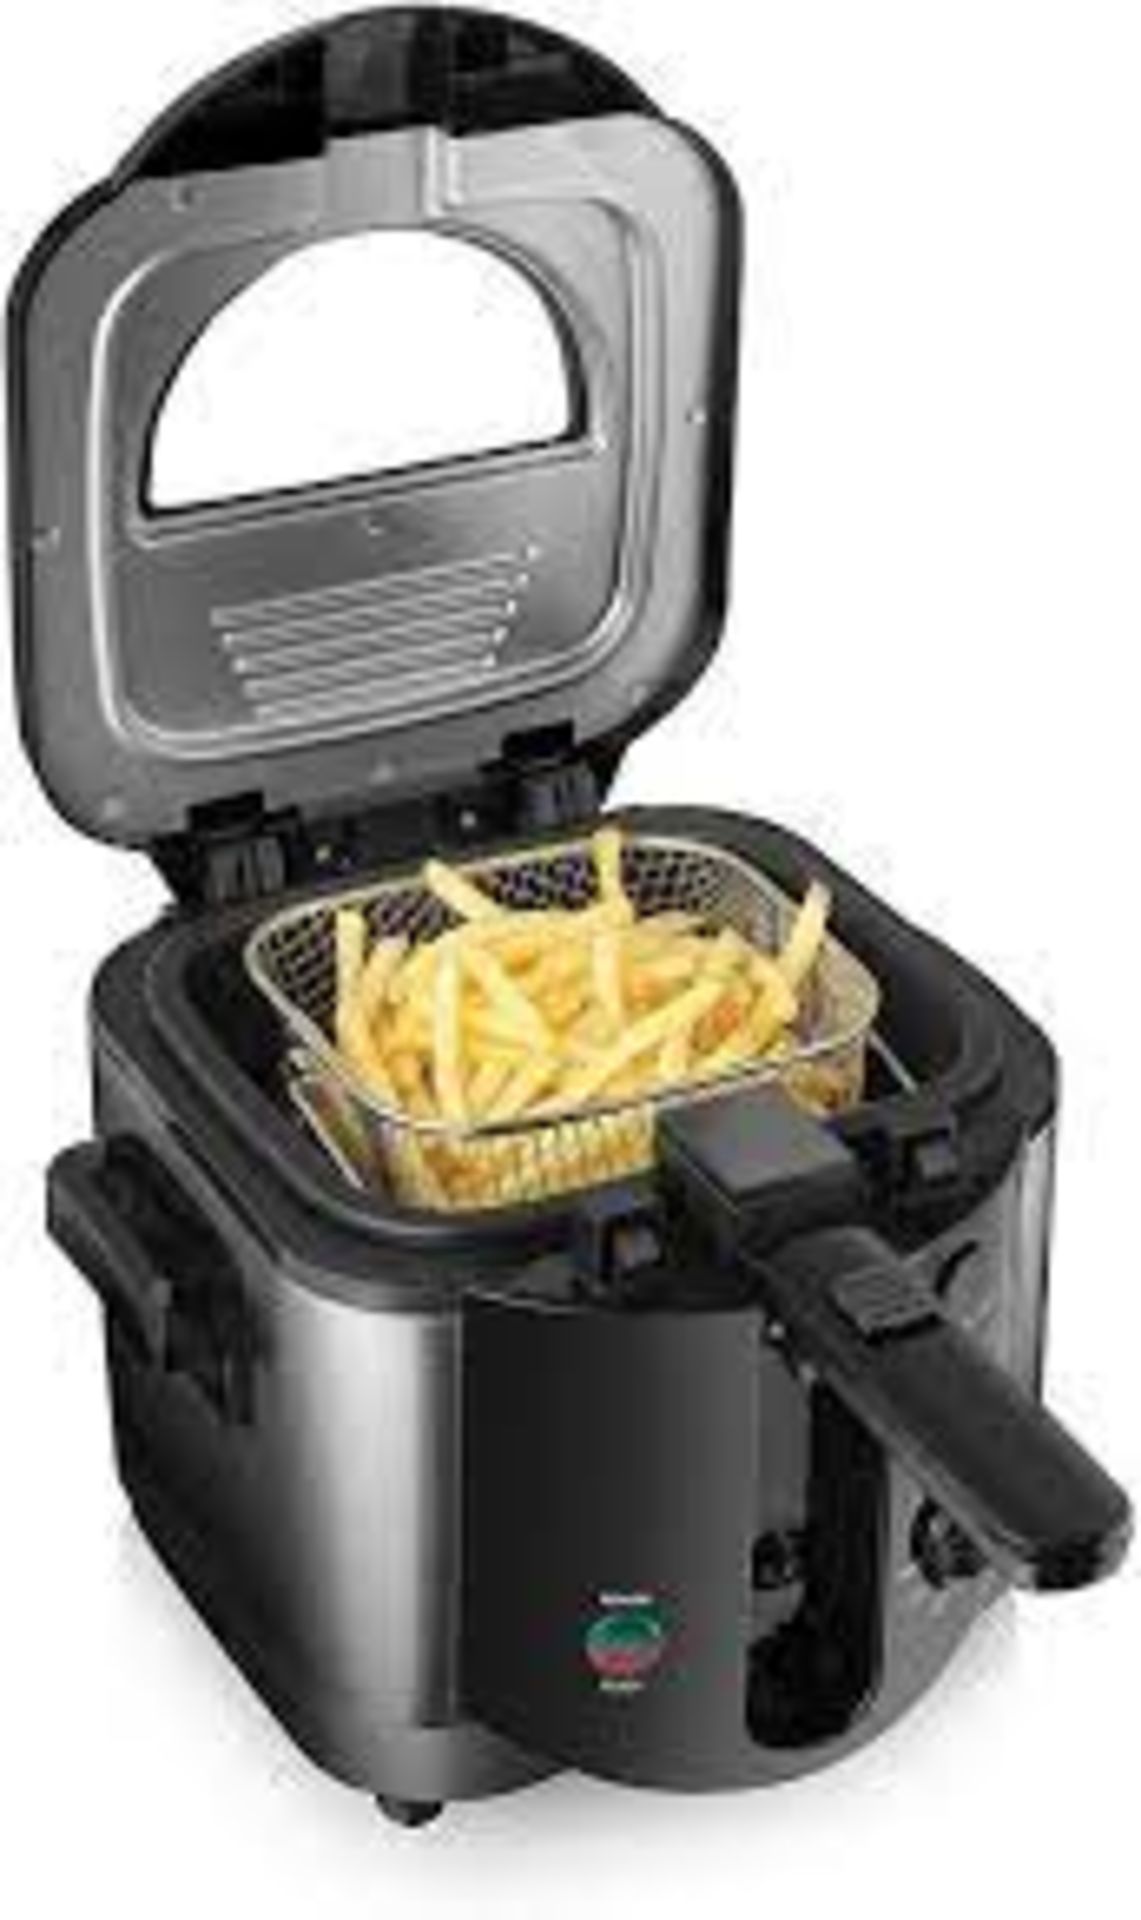 Tower T17001 Deep Fat Fryer with Adjustable Thermostat, 2L, 1500W, Black - U3 - Image 2 of 2